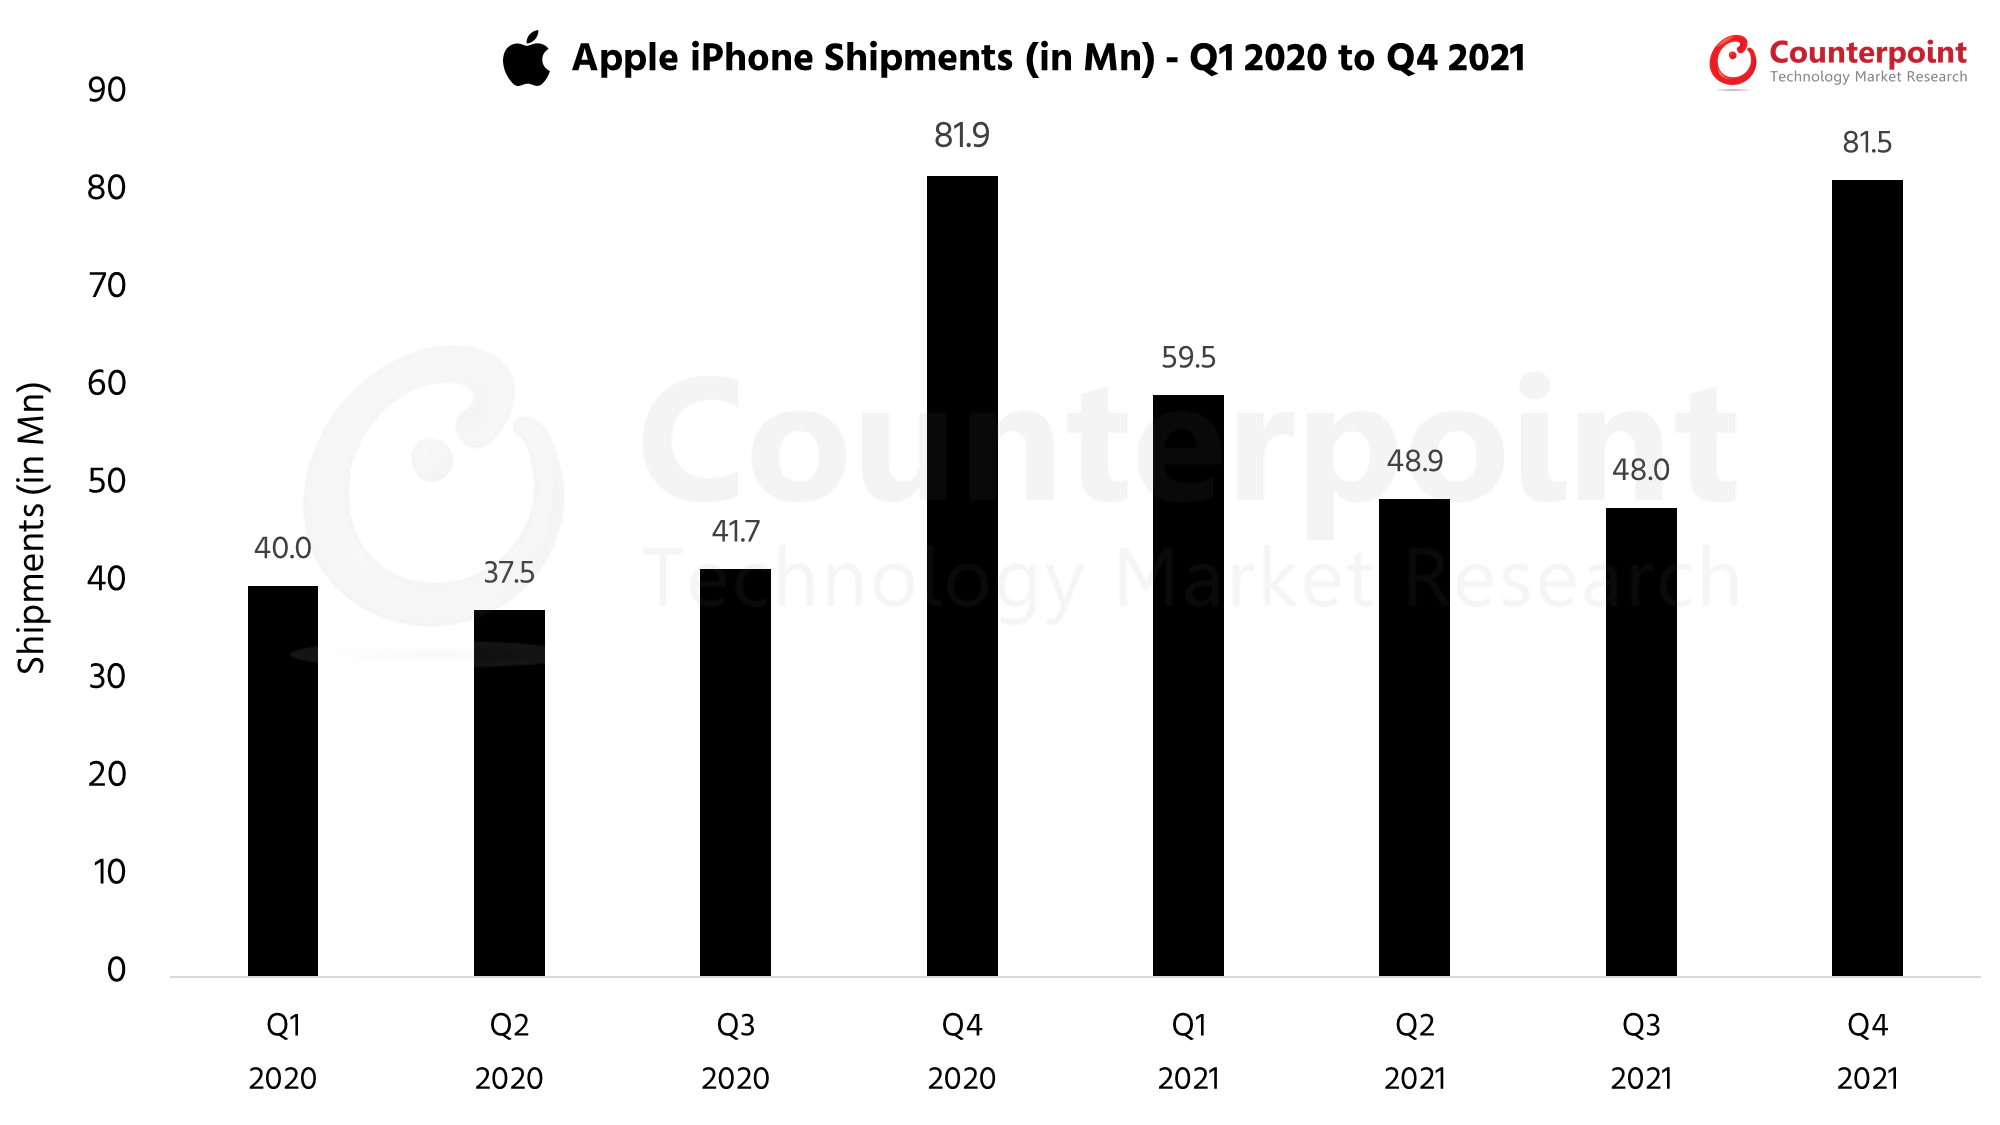 Counterpoint Research - Q4 2021 - Apple iPhone Market Share